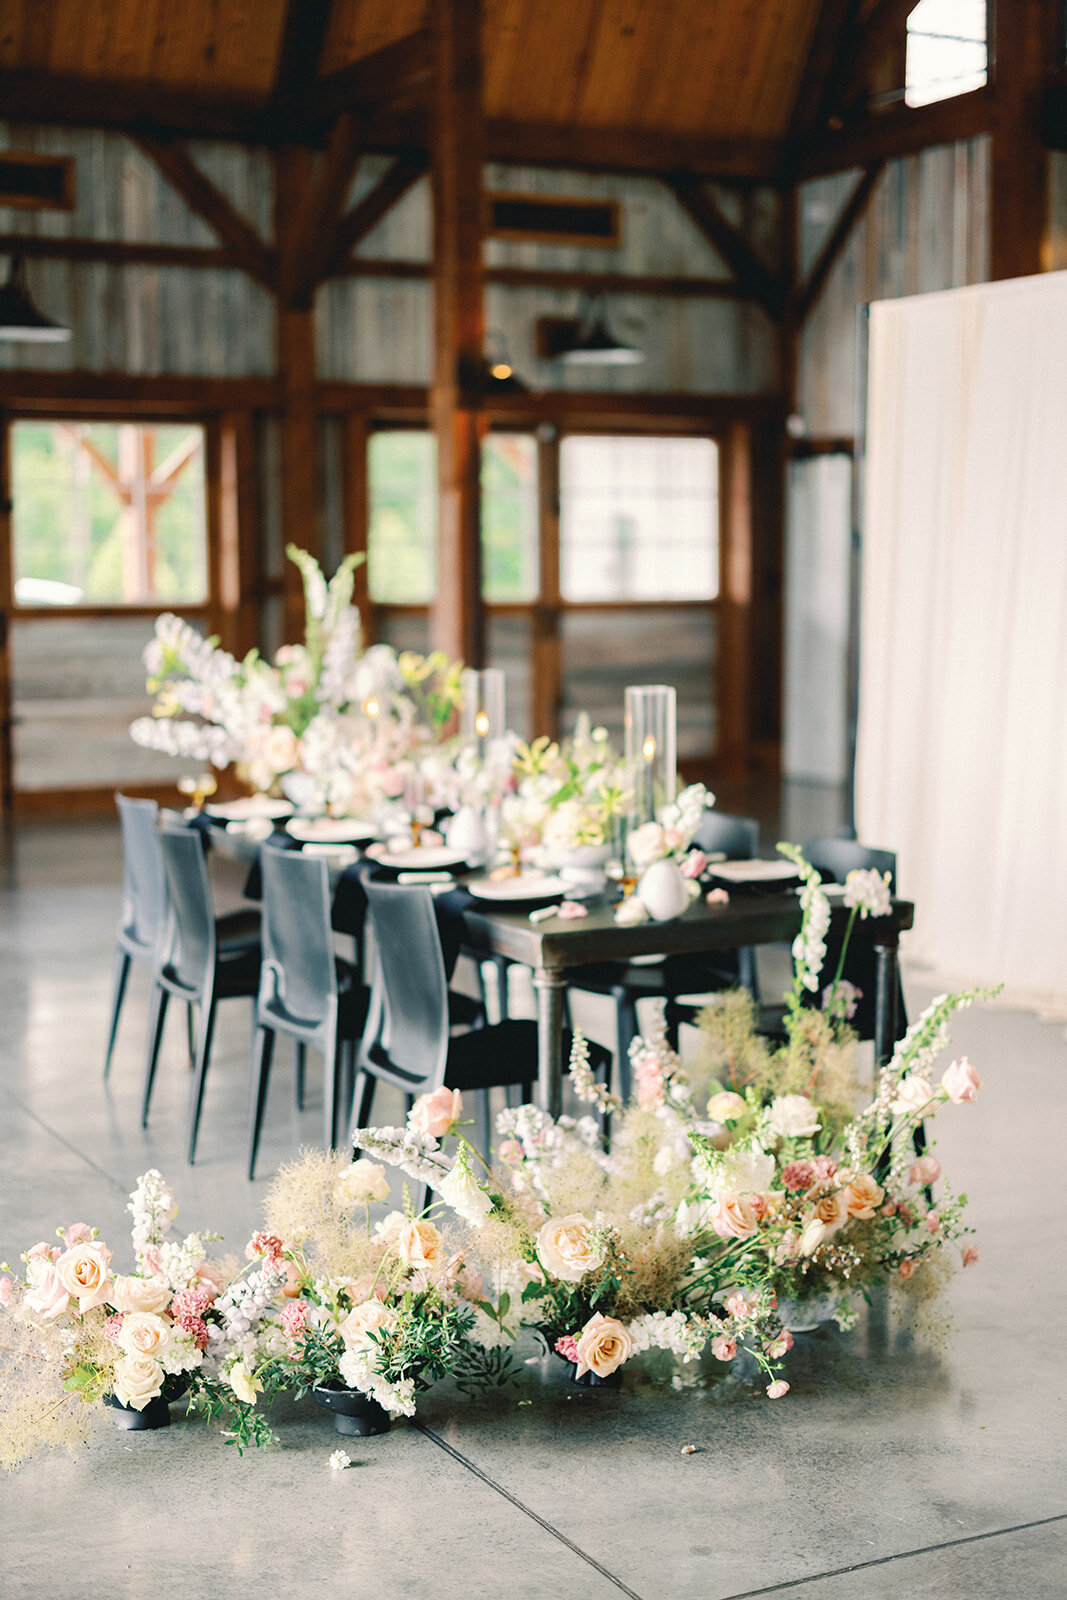 Table decorated with floral centerpieces and large floral arrangements on the floor